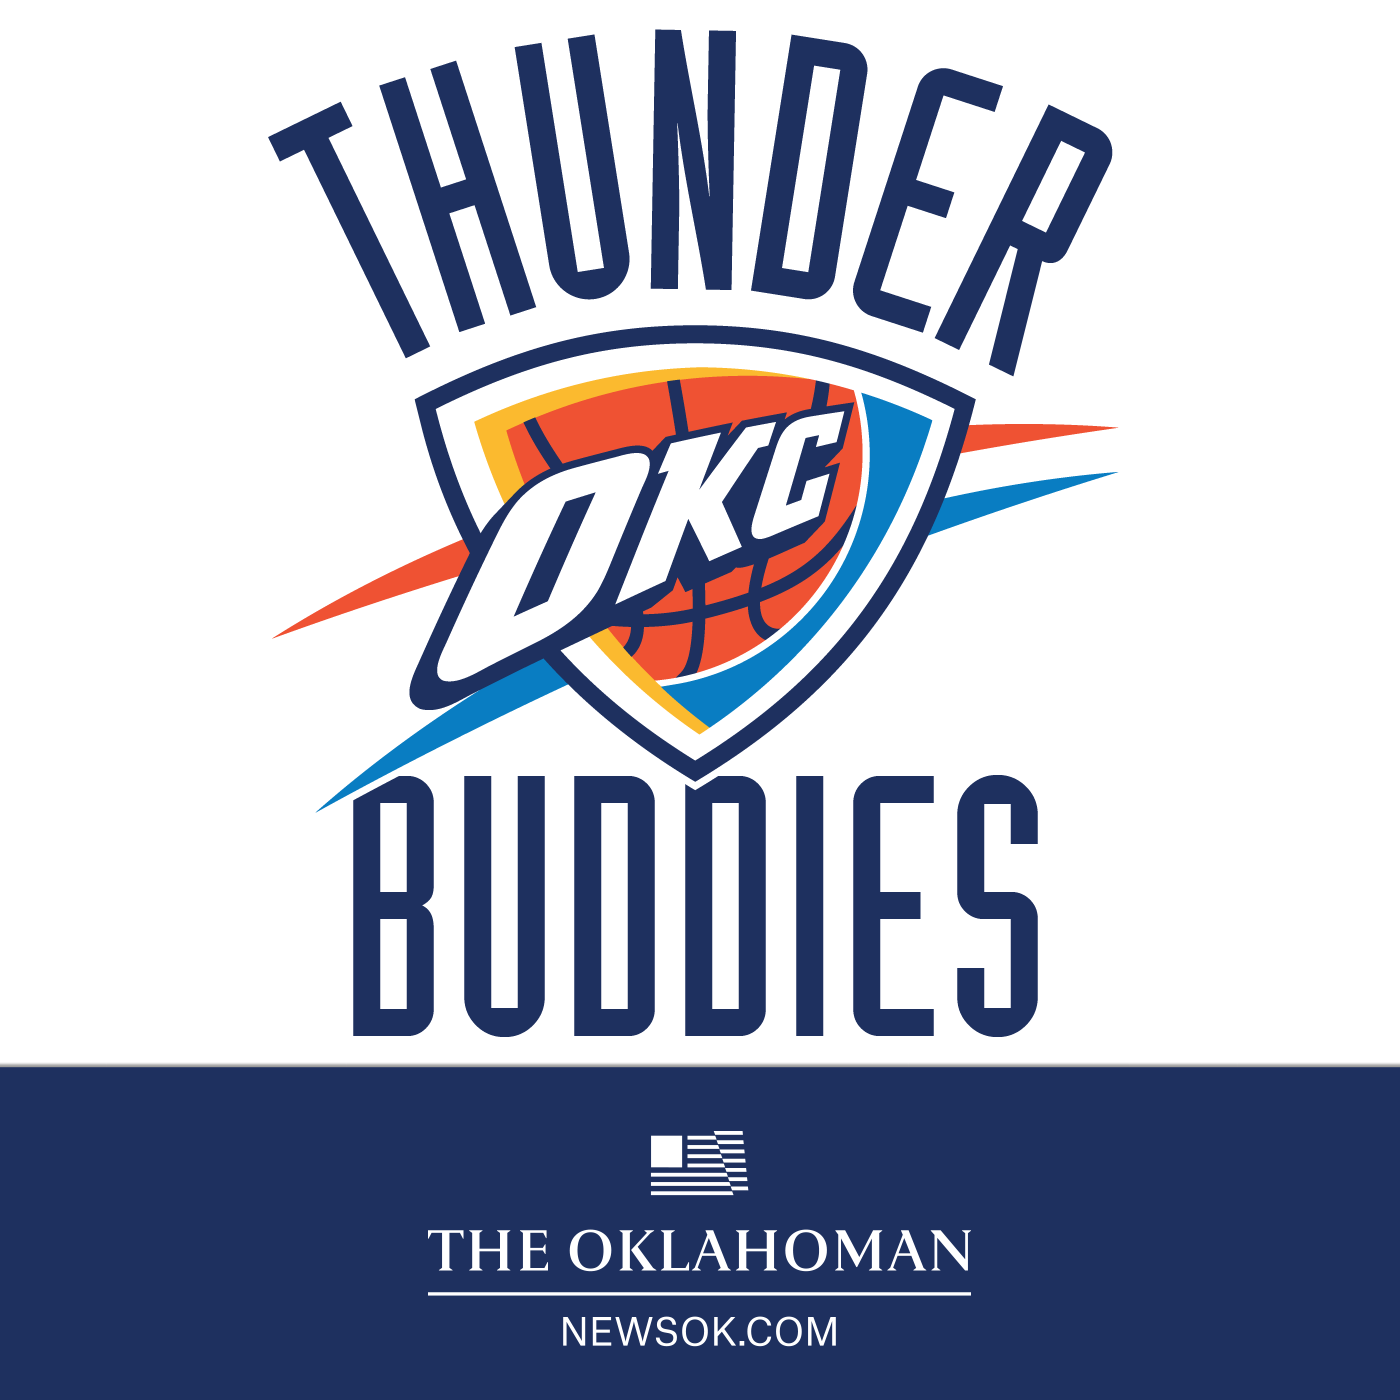 Introducing Joel, our new man on the Thunder beat